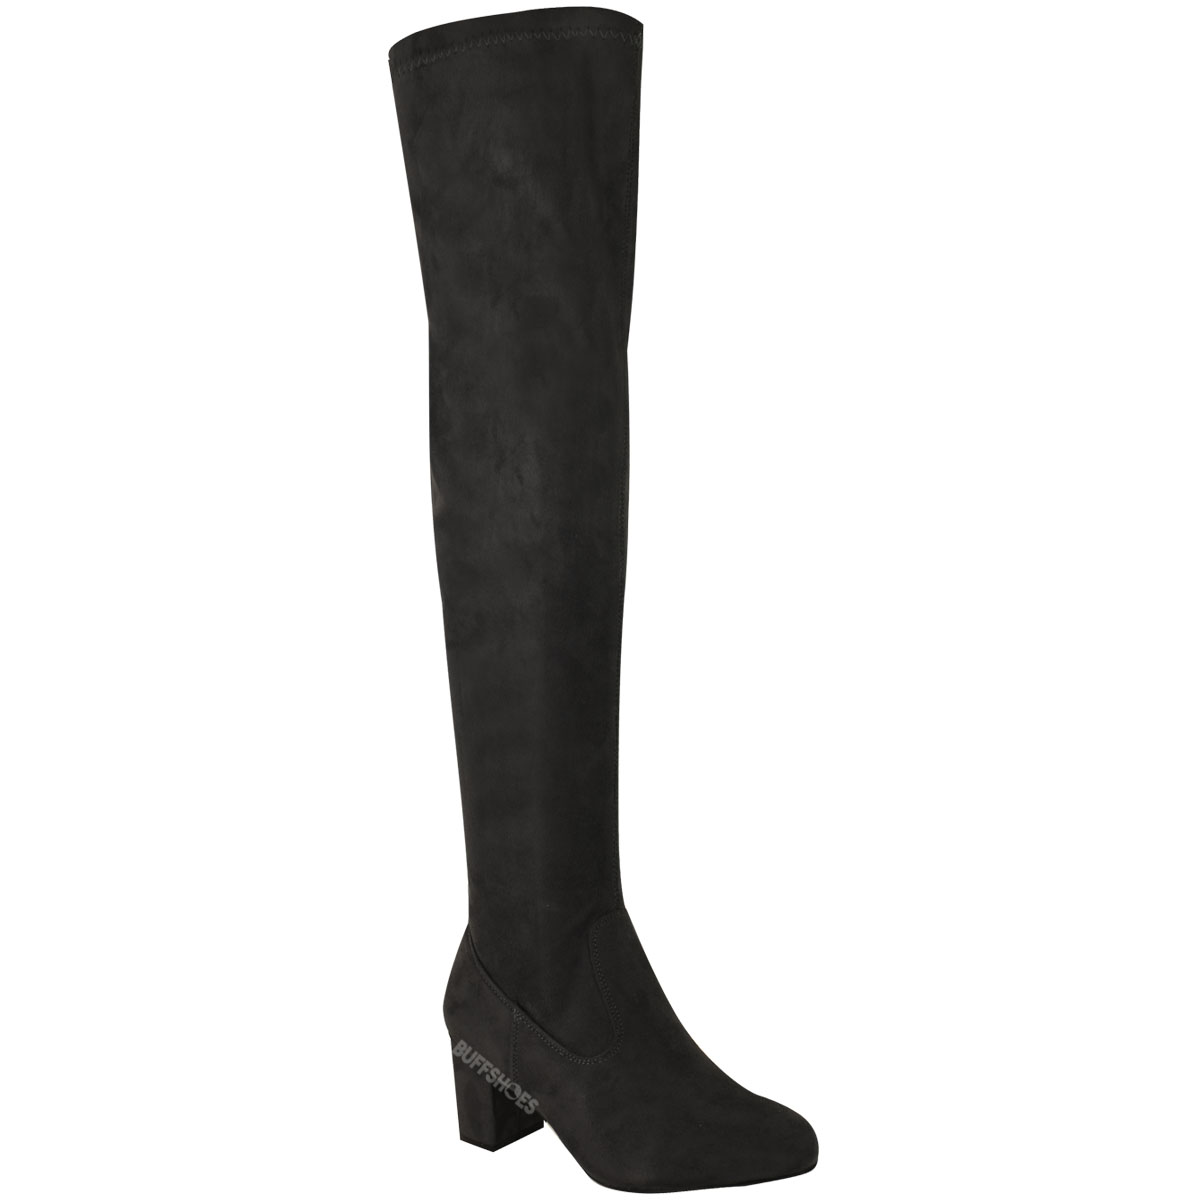 WOMENS LADIES OVER THE KNEE THIGH HIGH LOW BLOCK HEELS BOOTS WORK STRETCH SIZE 